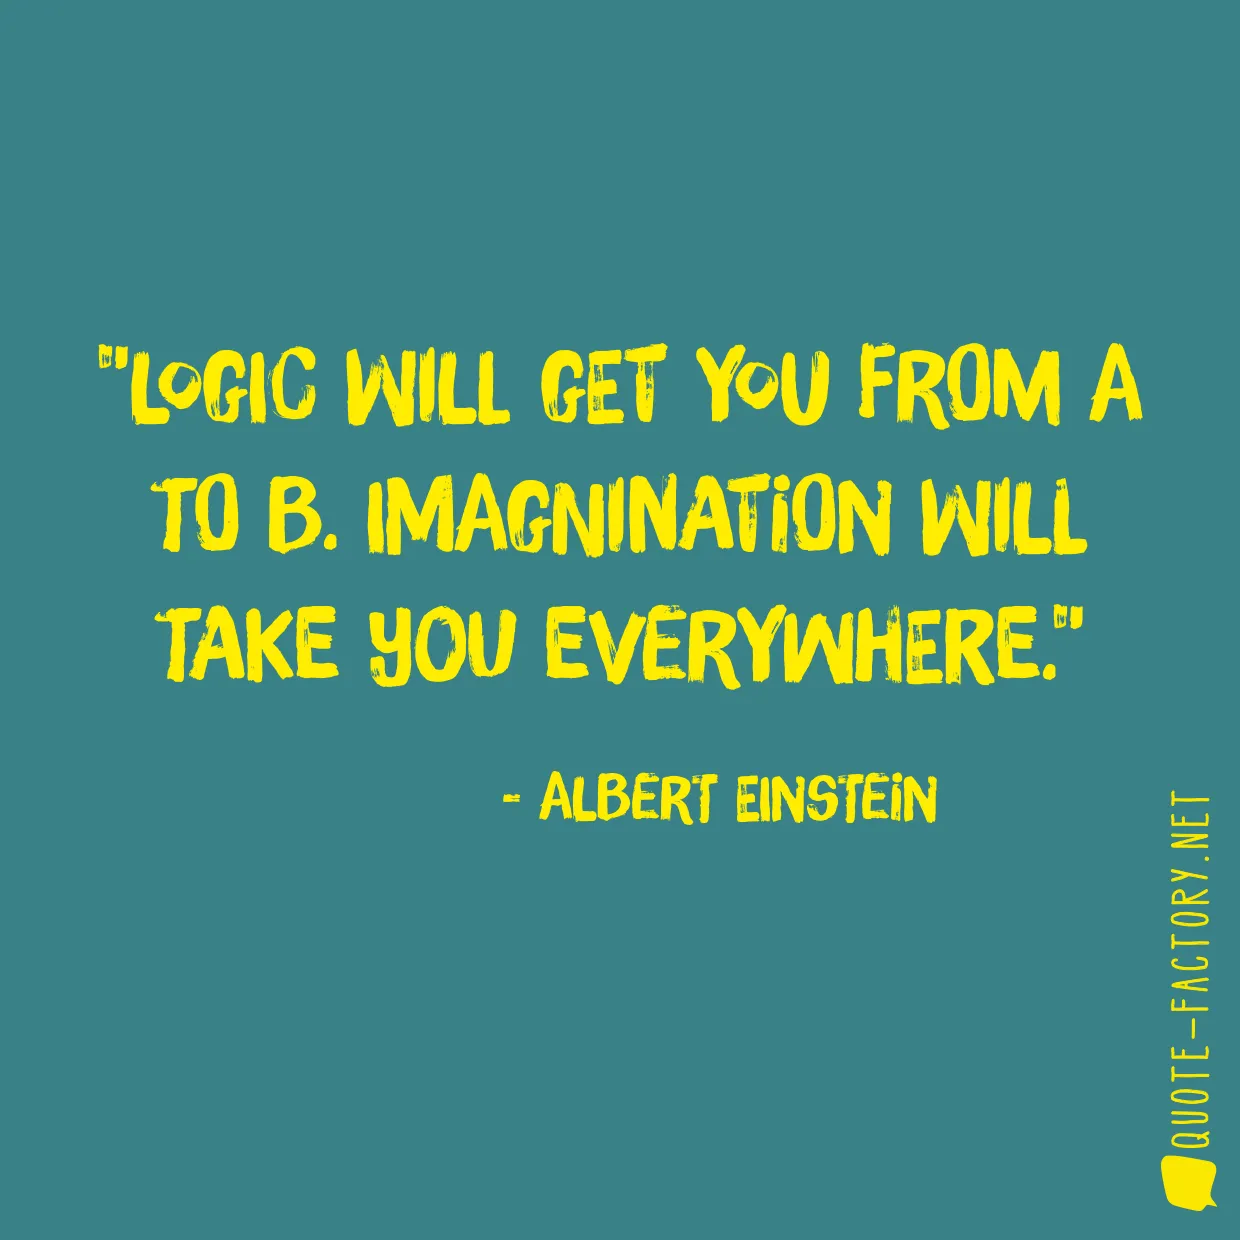 Logic will get you from A to B. Imagnination will take you everywhere.